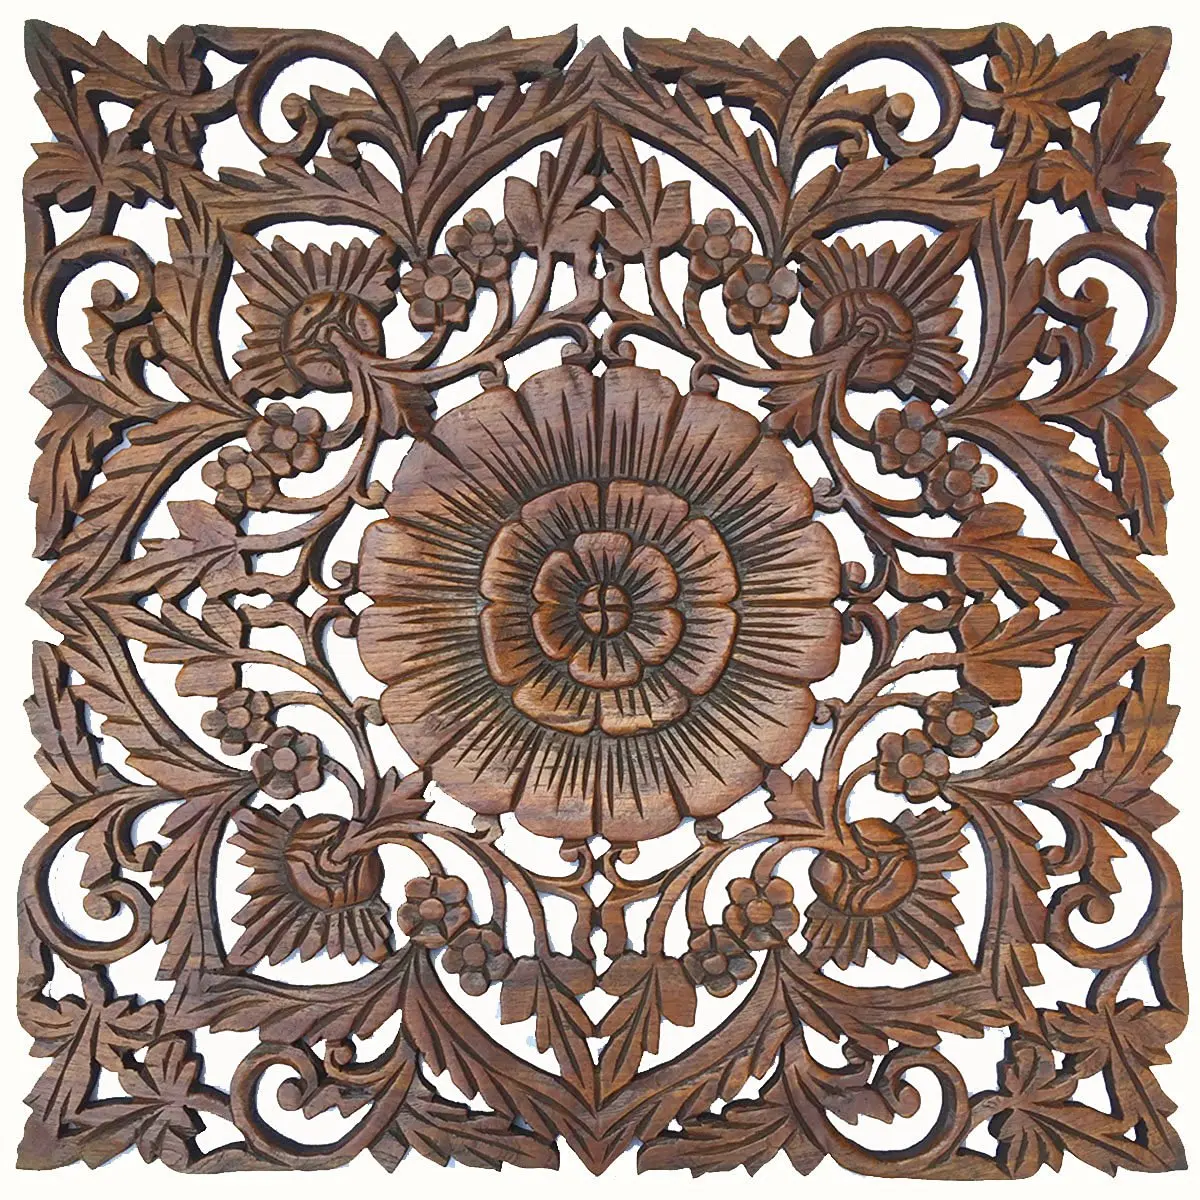 Cheap Carved Wood Wall Art Decor Find Carved Wood Wall Art Decor Deals On Line At Alibaba Com